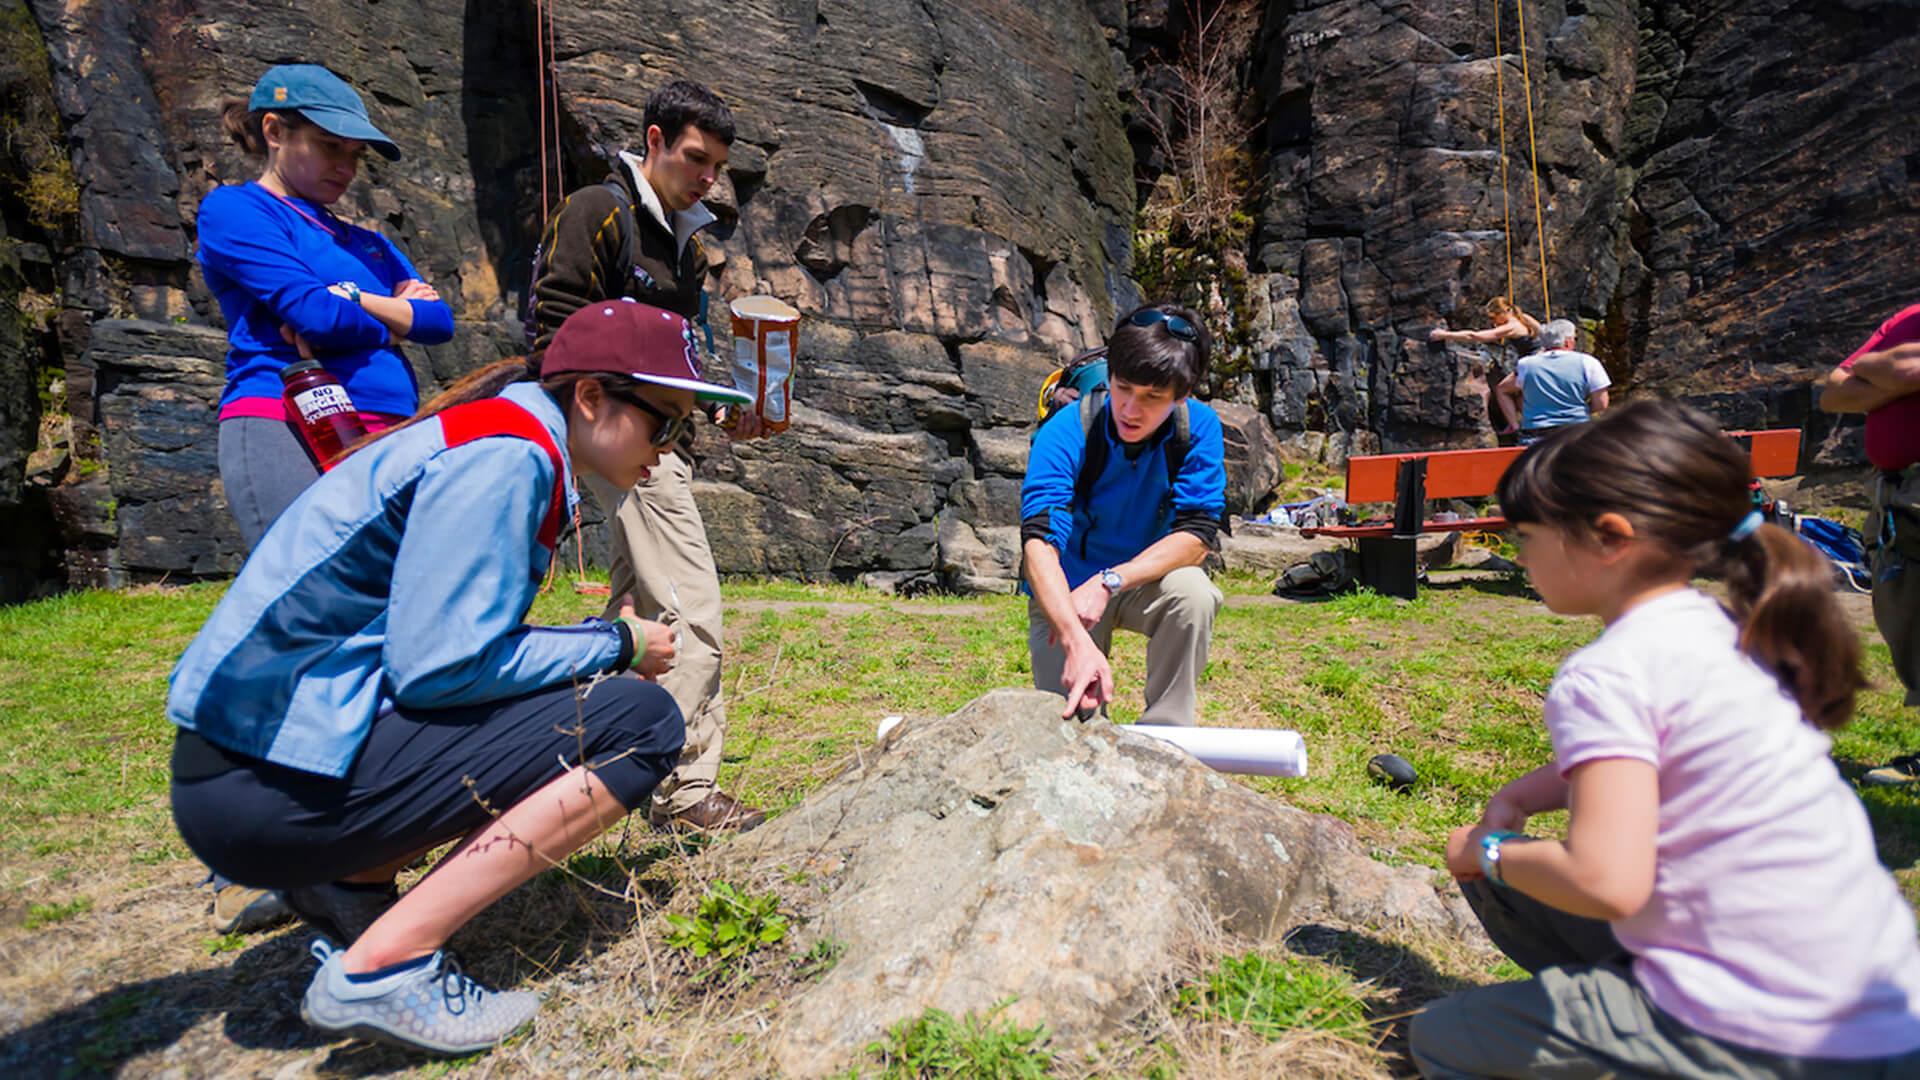 Students and faculty members spend an afternoon lab exploring the geology of Moss Island in Little Falls, N.Y., with geology professor Martin Wong.